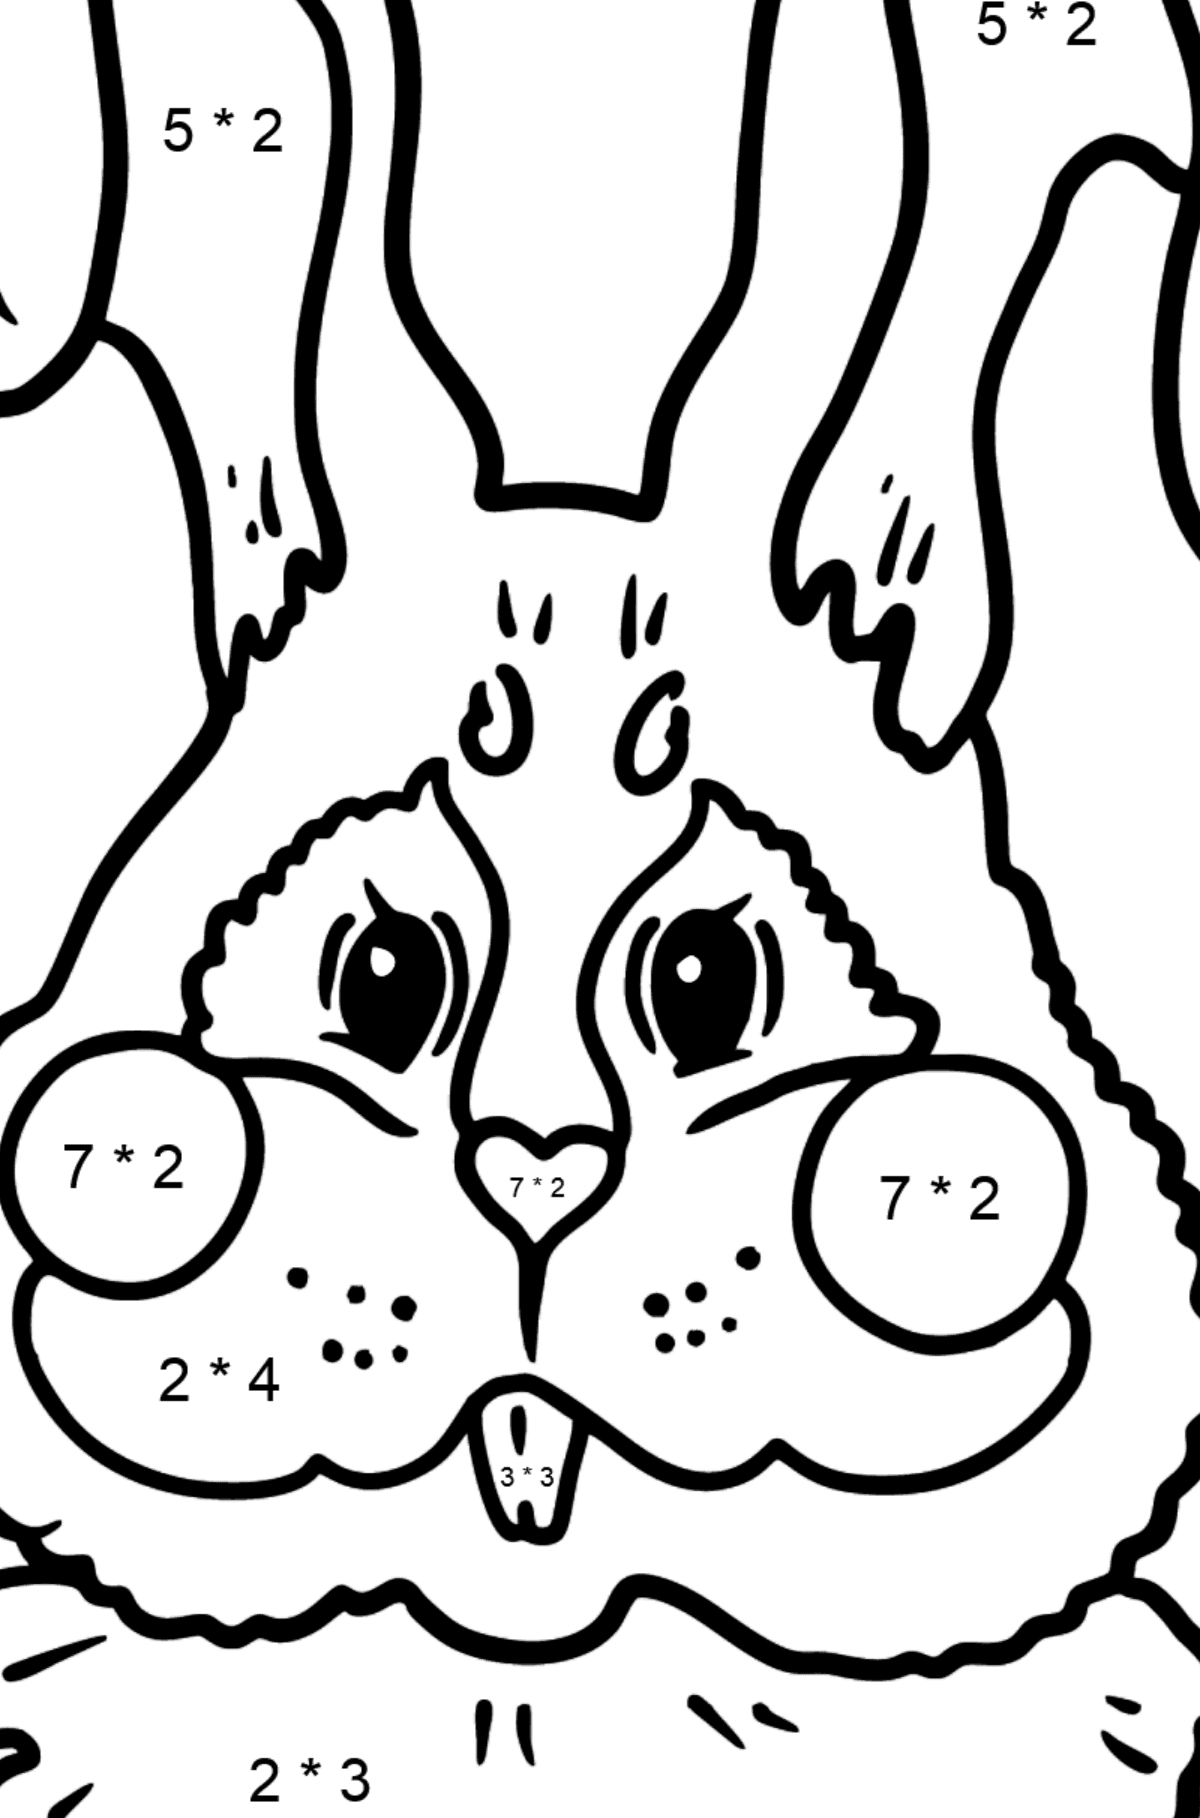 Bunny Face coloring page - Math Coloring - Multiplication for Kids